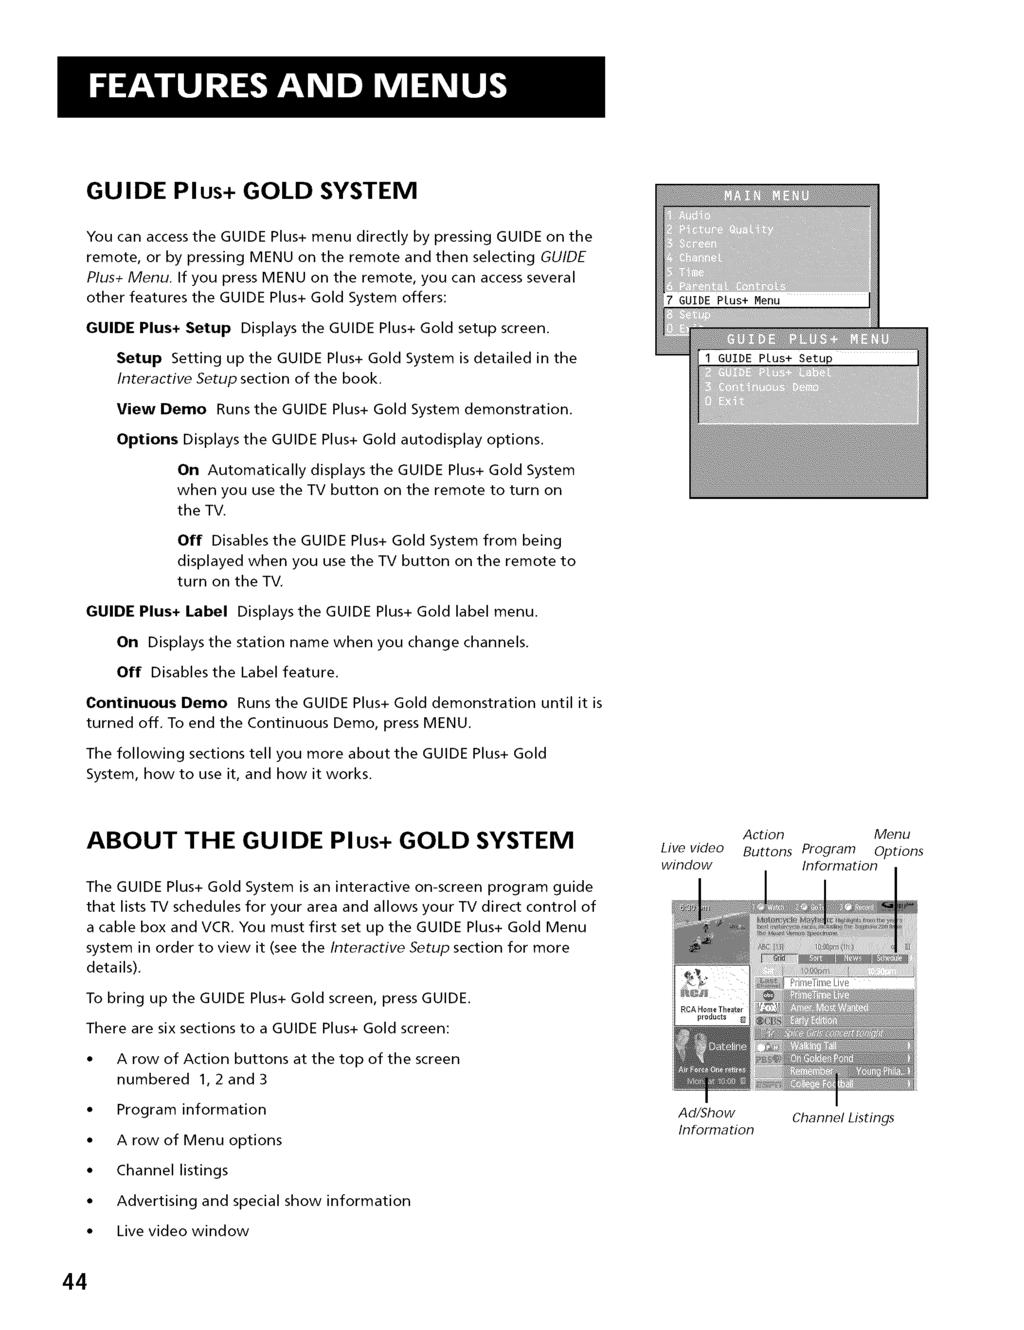 GUIDE Plus+ GOLD SYSTEM You can access the GUIDE Plus+ menu directly by pressing GUIDE on the remote, or by pressing MENU on the remote and then selecting GUIDE Plus+ Menu.